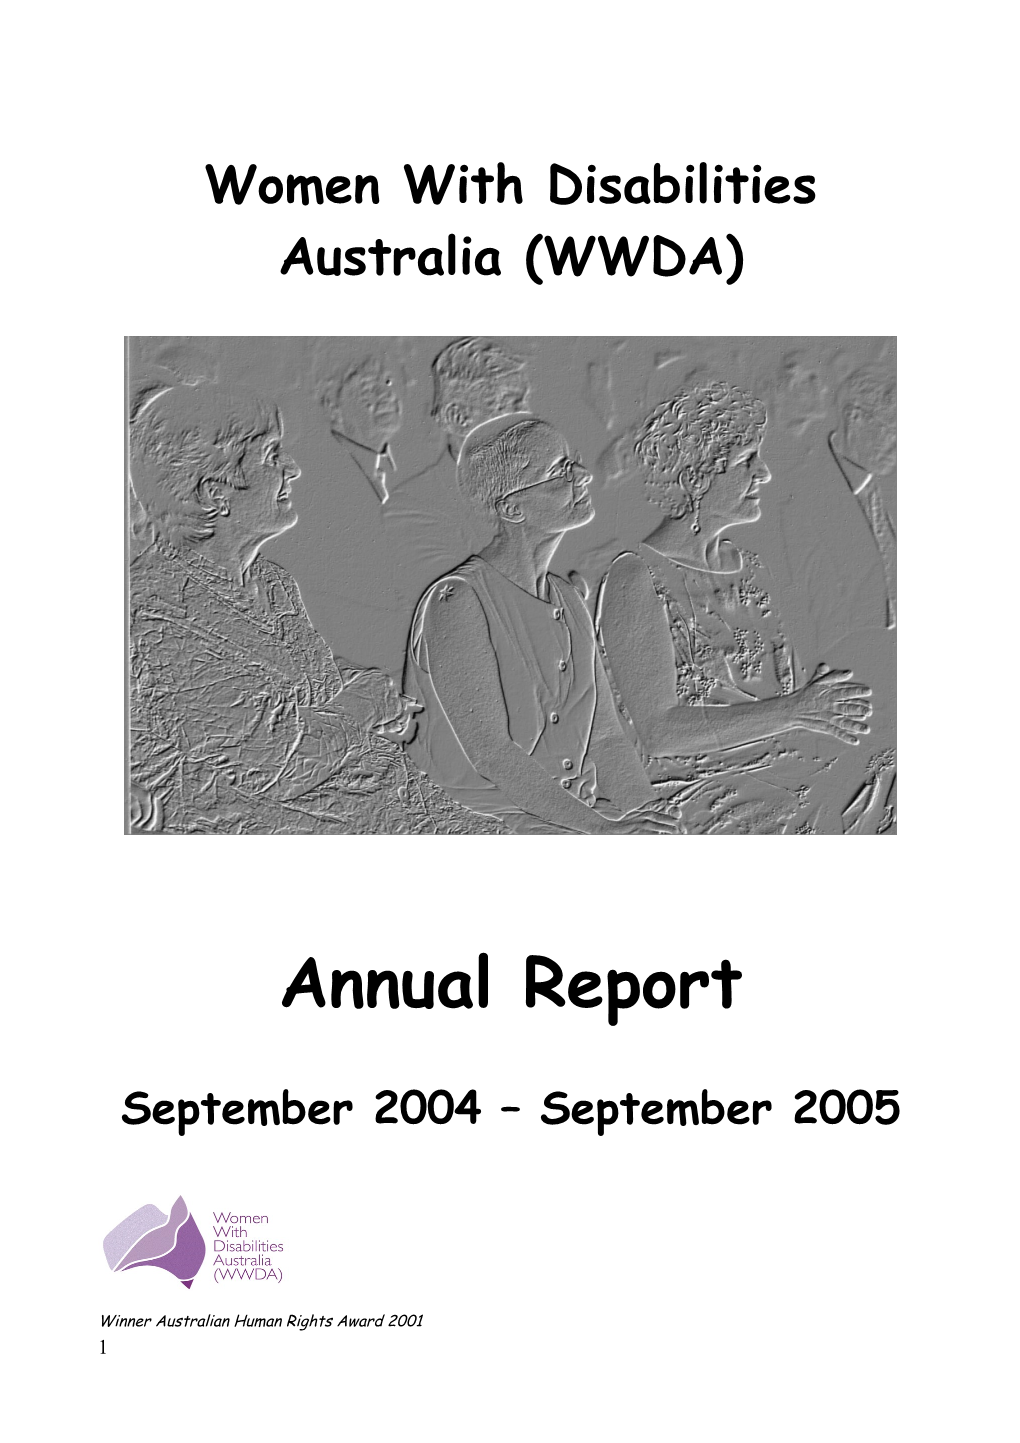 Submission from Women with Disabilities Australia (WWDA) to the Human Rights and Equal